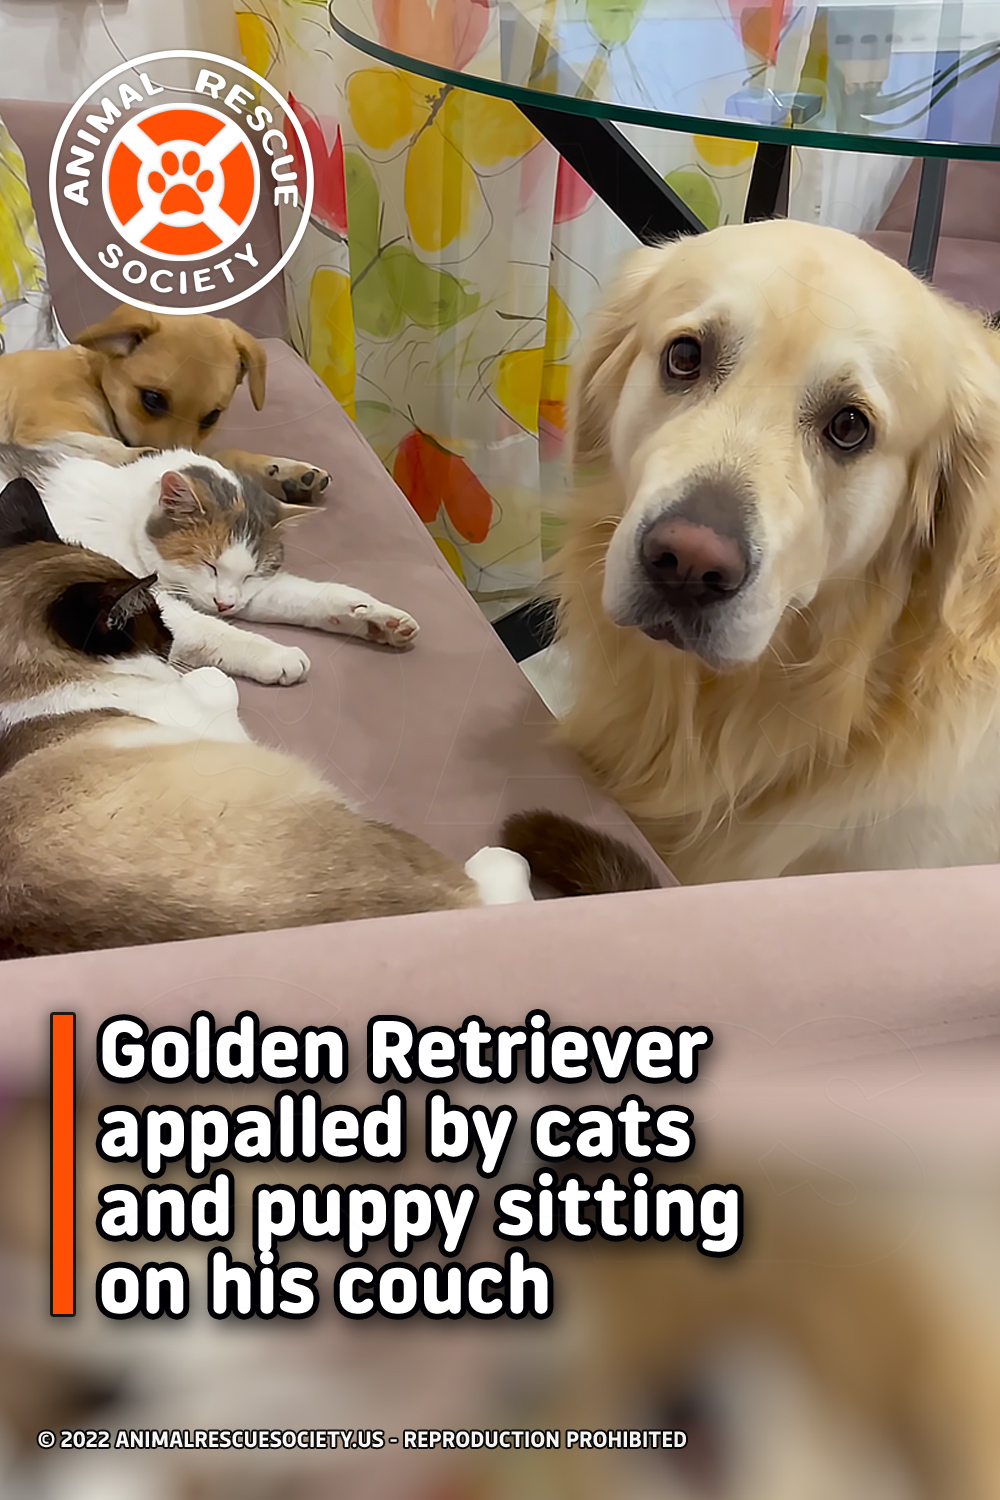 Golden Retriever appalled by cats and puppy sitting on his couch